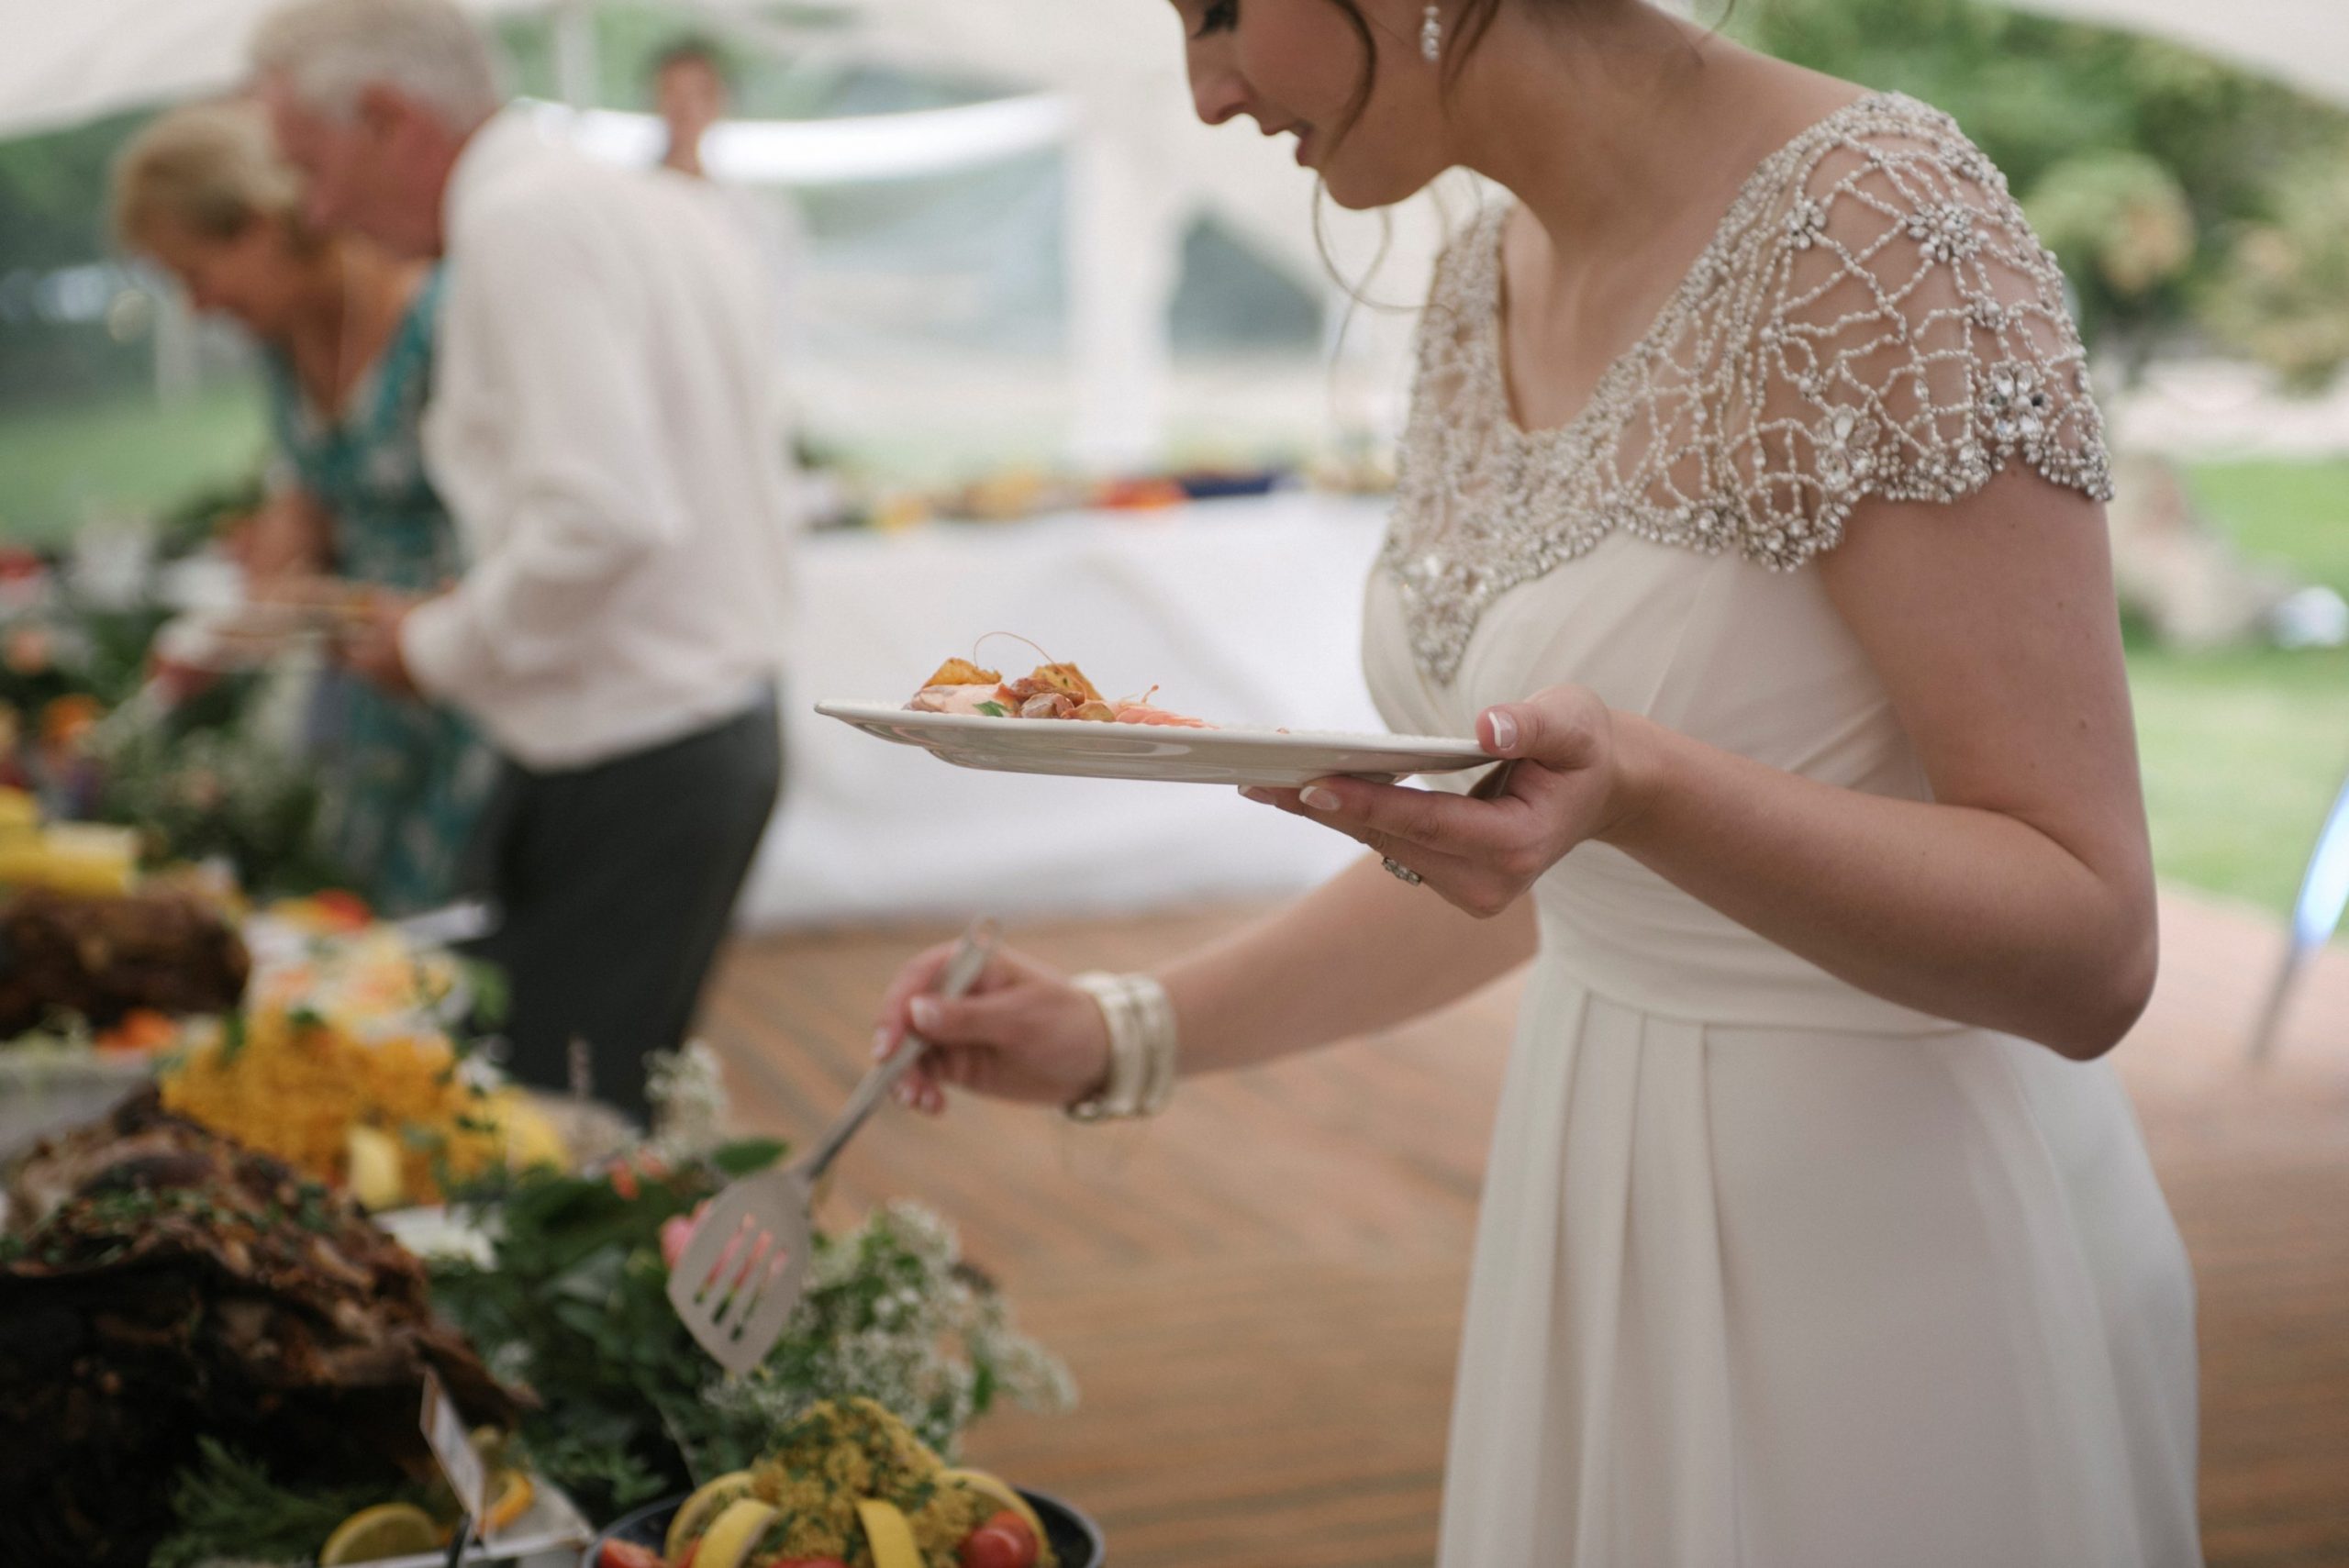 dietry requirements img scaled - How can I deal with special dietary requirements at my wedding or event?